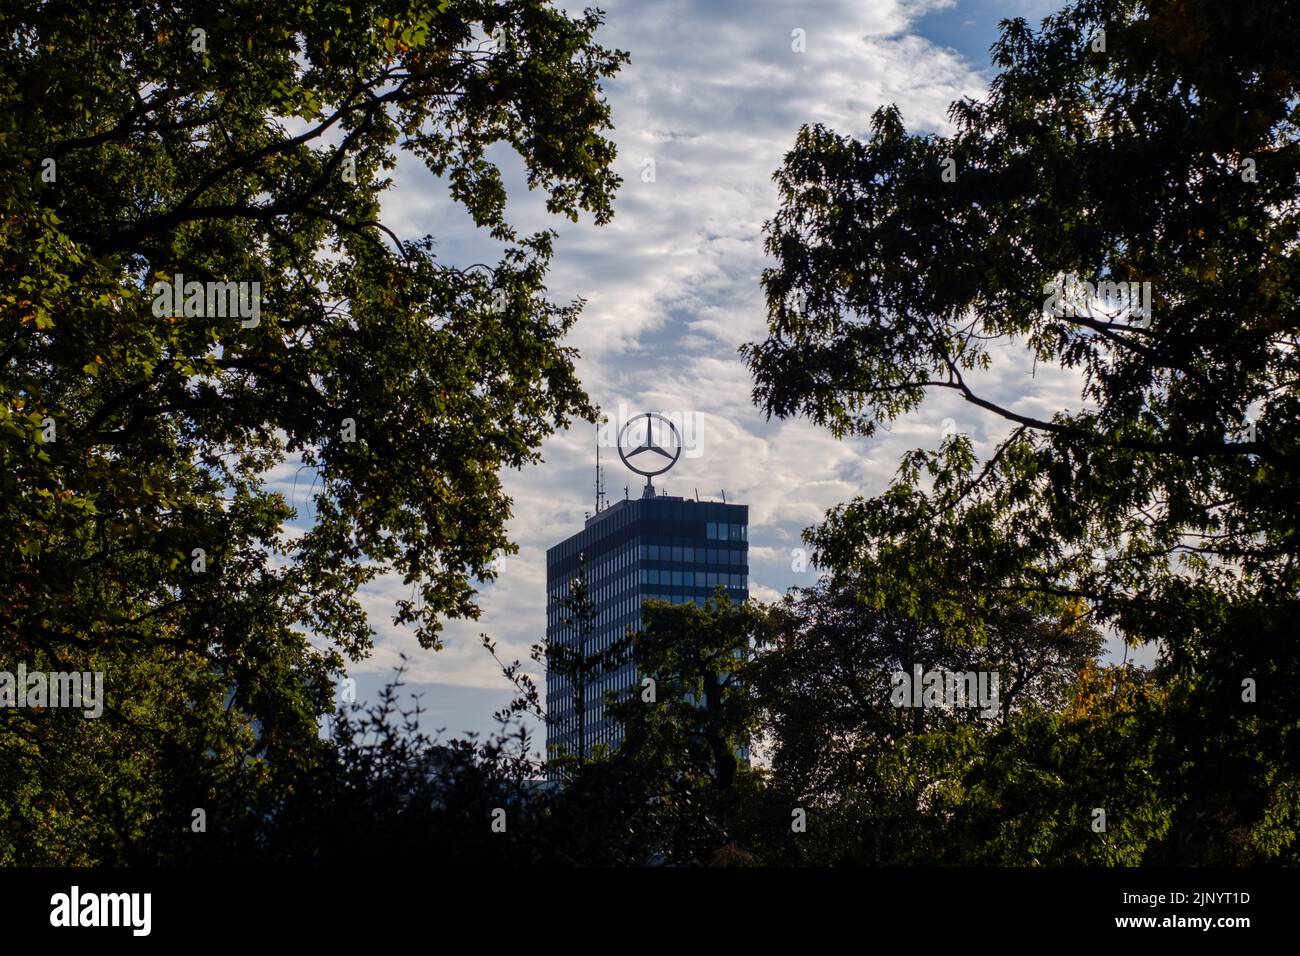 Mercedes Benz star on top of the Europacenter tower seen through dark branches in Berlin, Germany in October 2018. Stock Photo